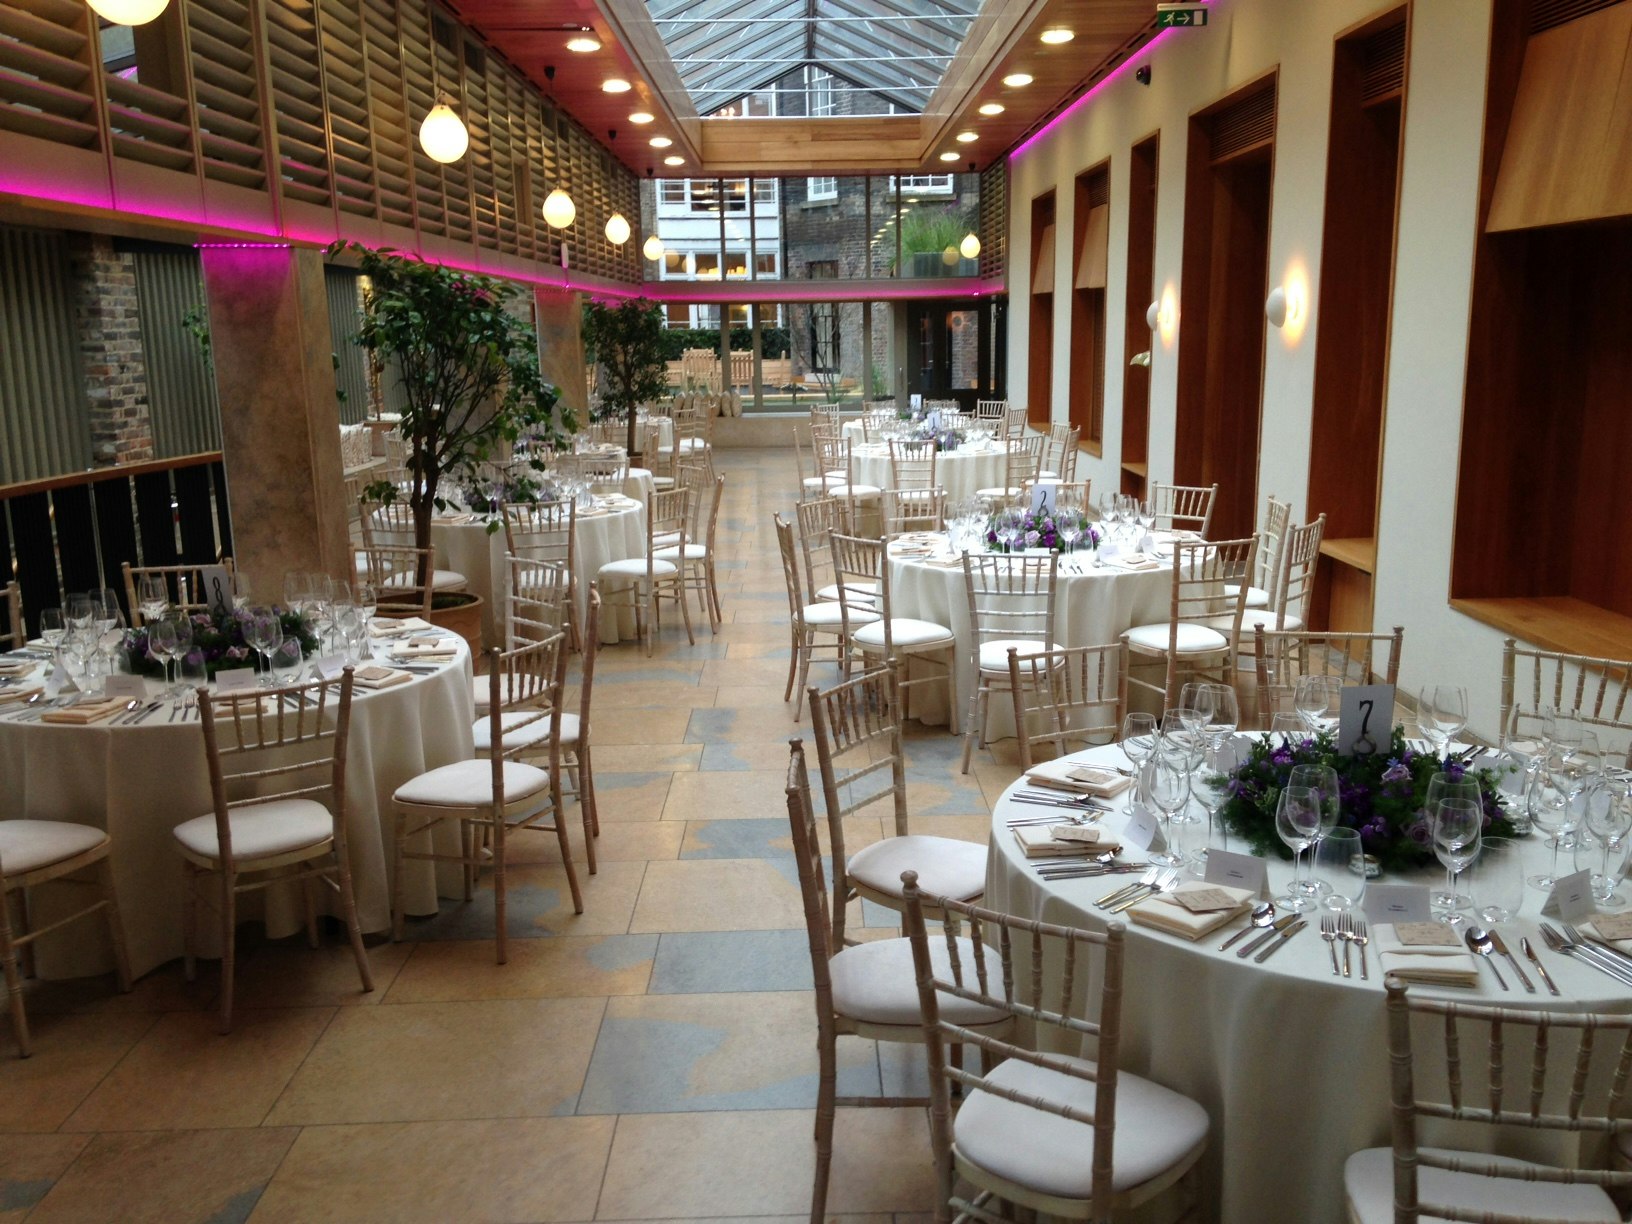 Private Dining Rooms Venues in West London - No.11 Cavendish Square